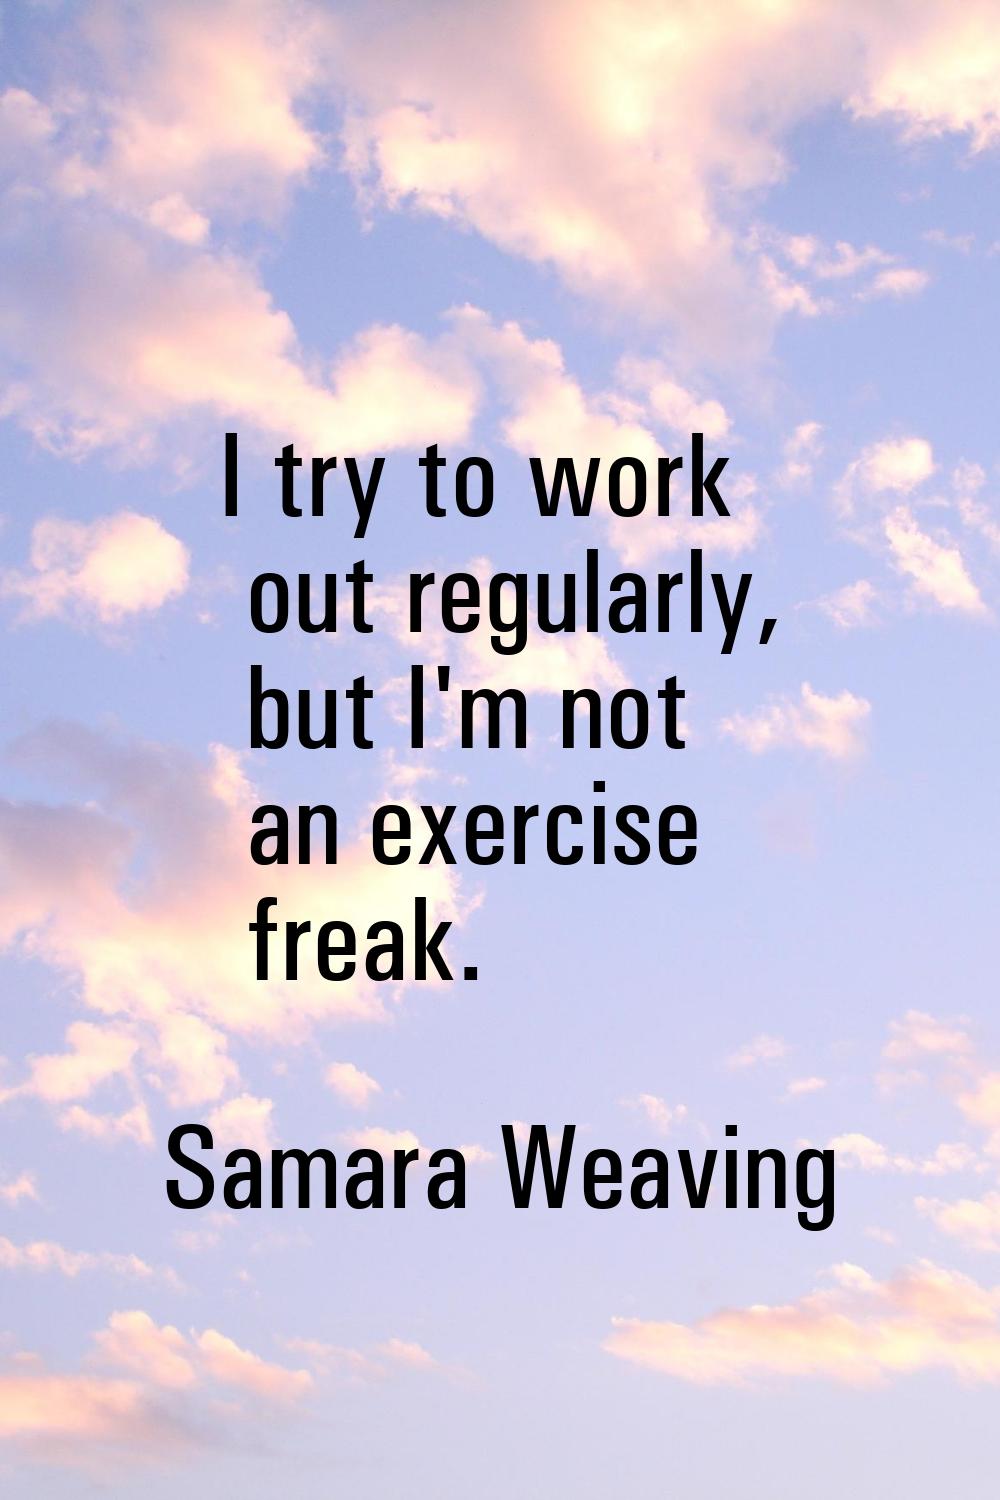 I try to work out regularly, but I'm not an exercise freak.